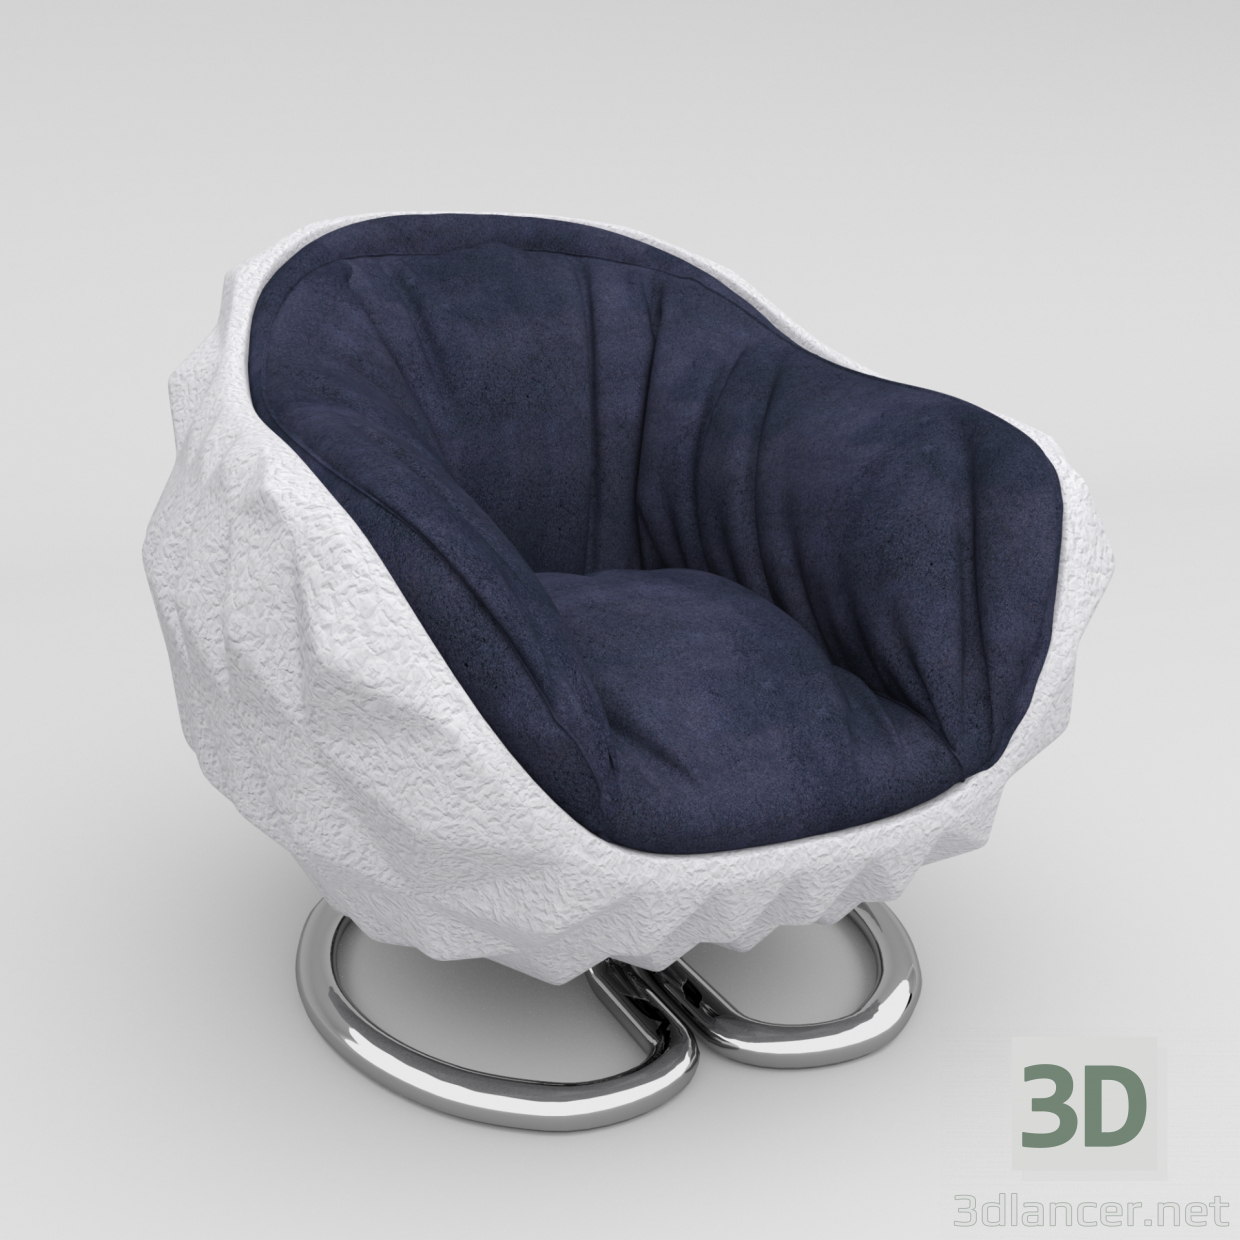 Mines-Chair 3D modelo Compro - render